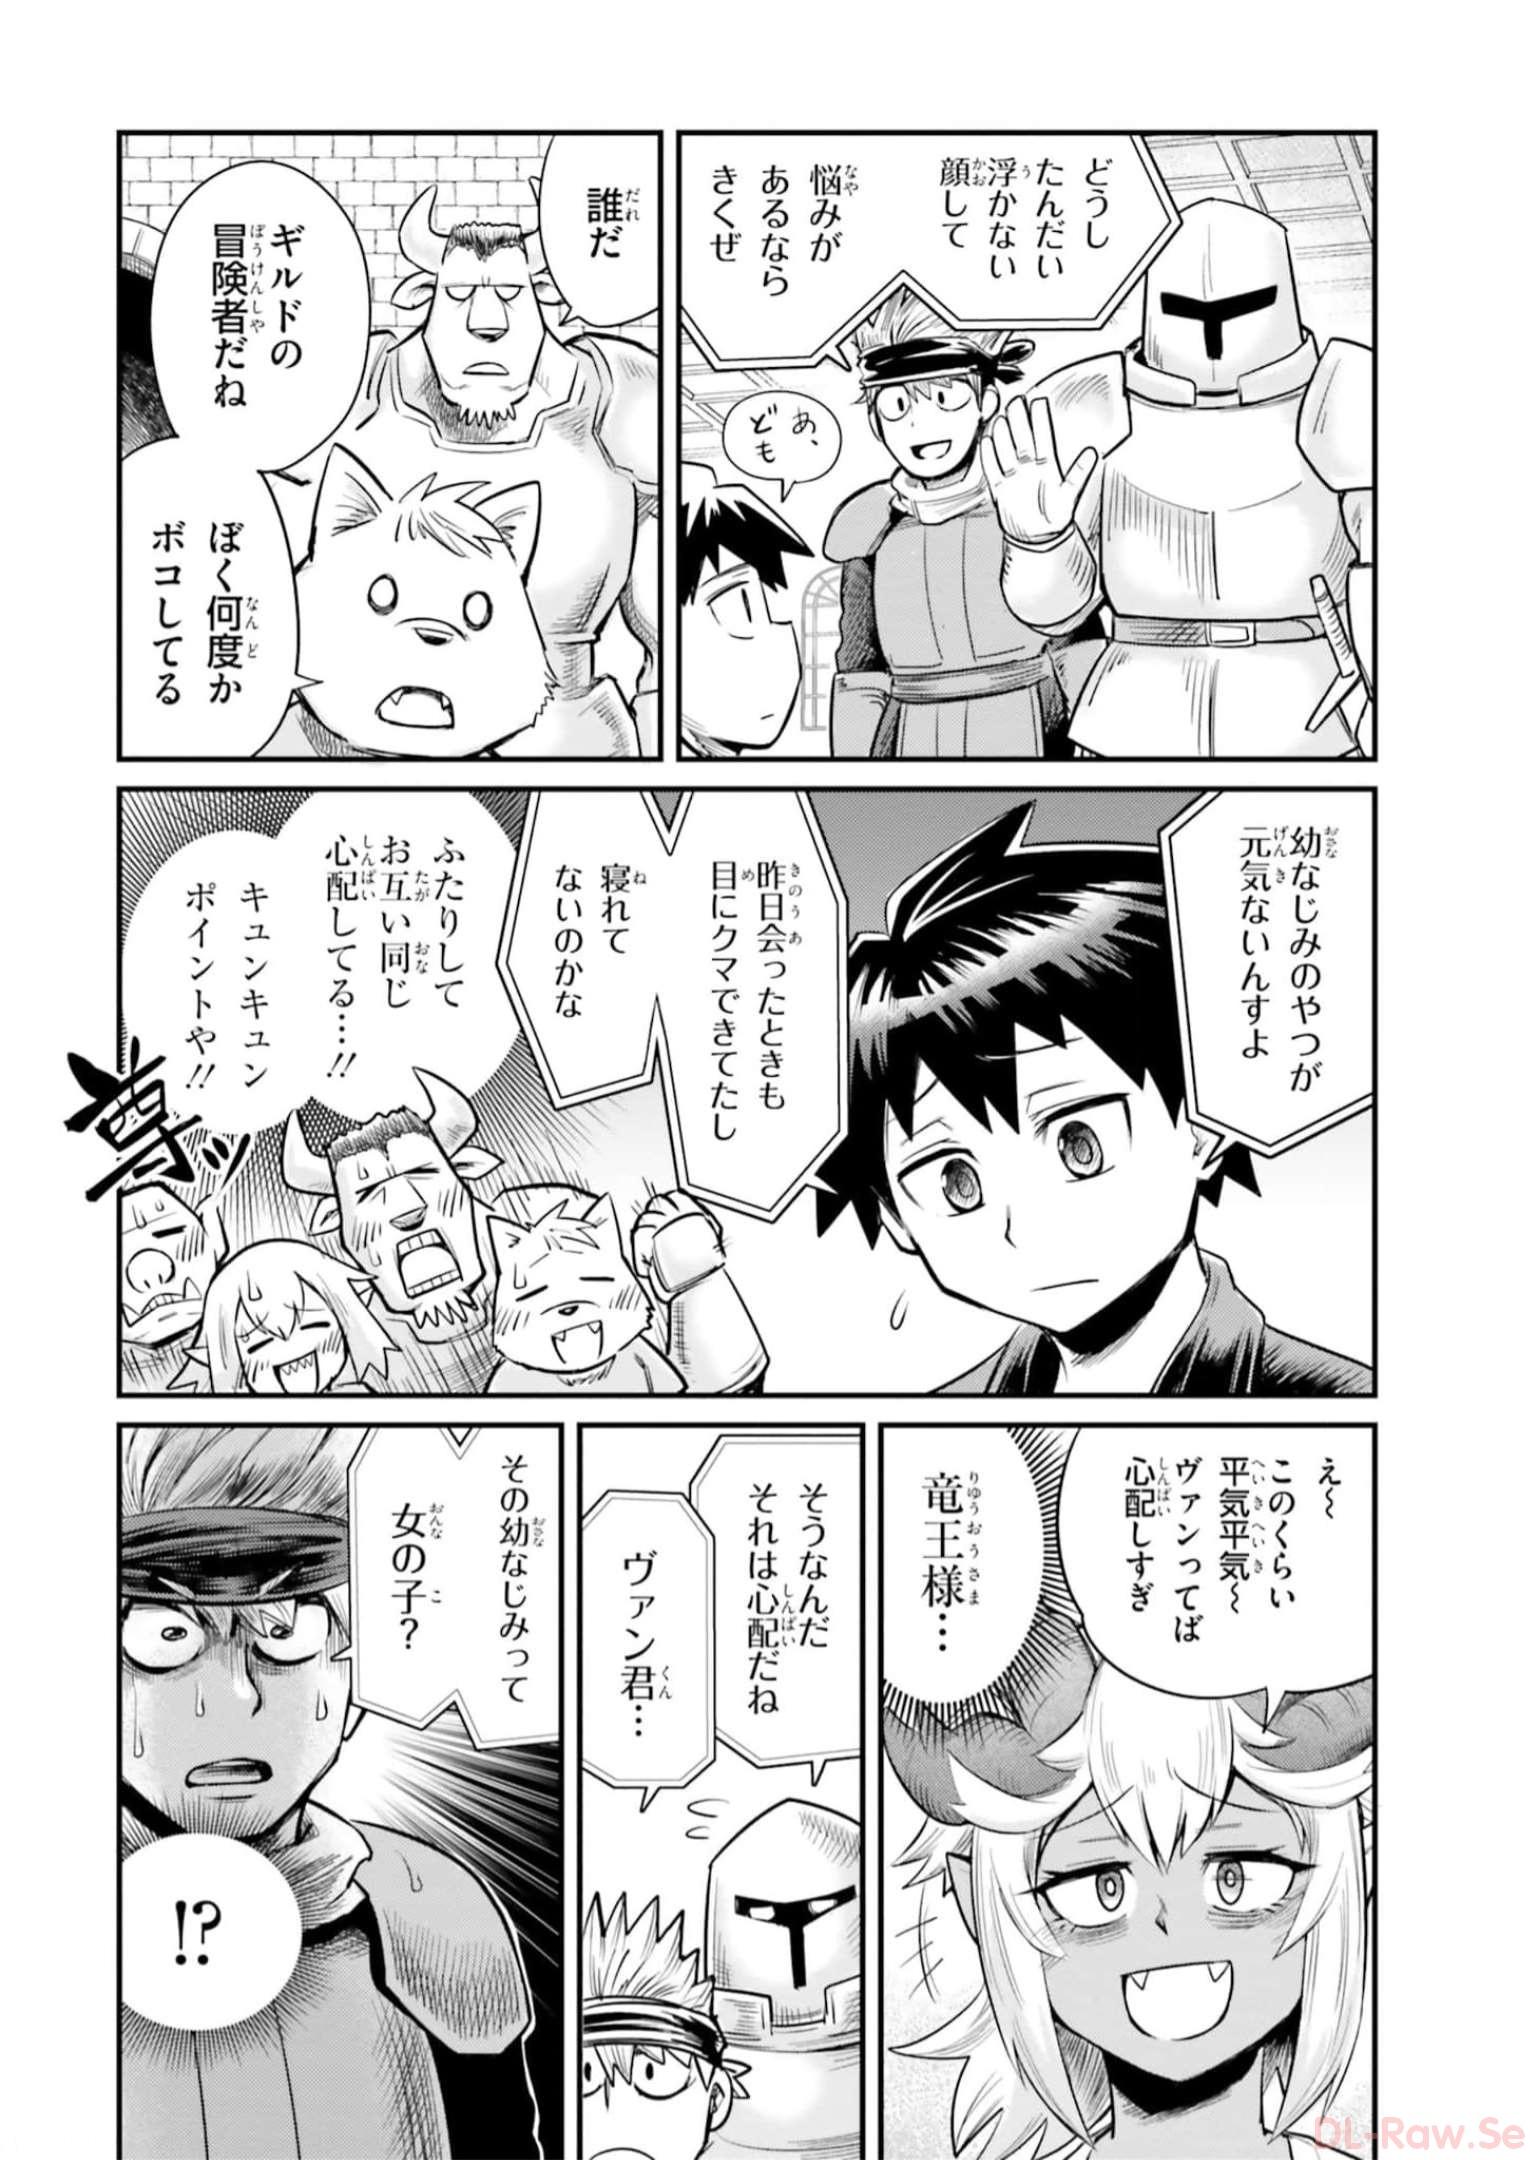 Dungeon Friends Forever Dungeon's Childhood Friend ダンジョンの幼なじみ 第4話 - Page 10